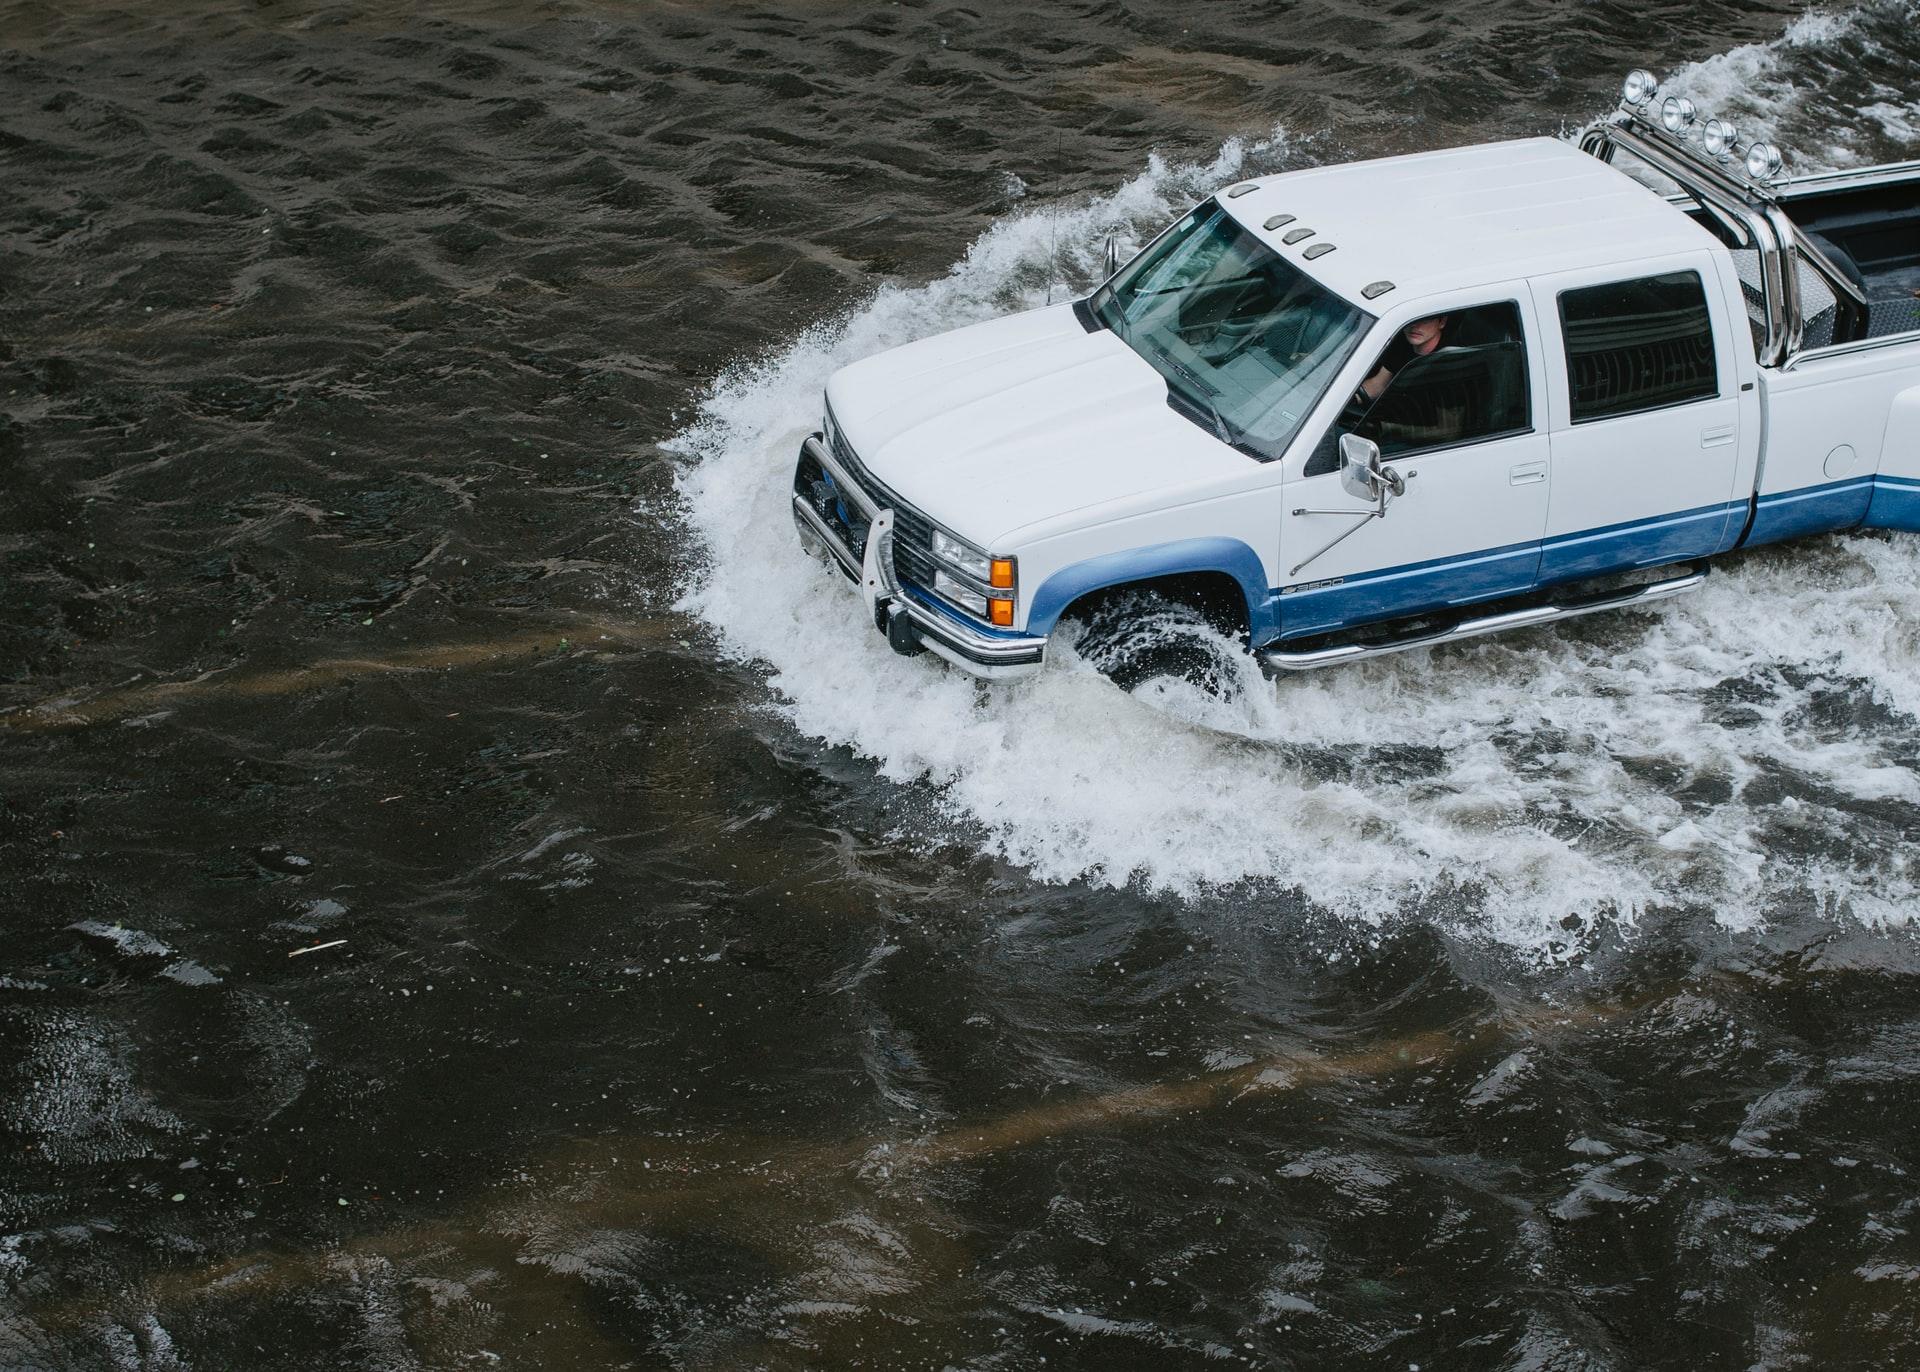 Flooded cars are usually not salvageable, but sketchy dealers might try to conceal the damage and sell the car for a standard used price.